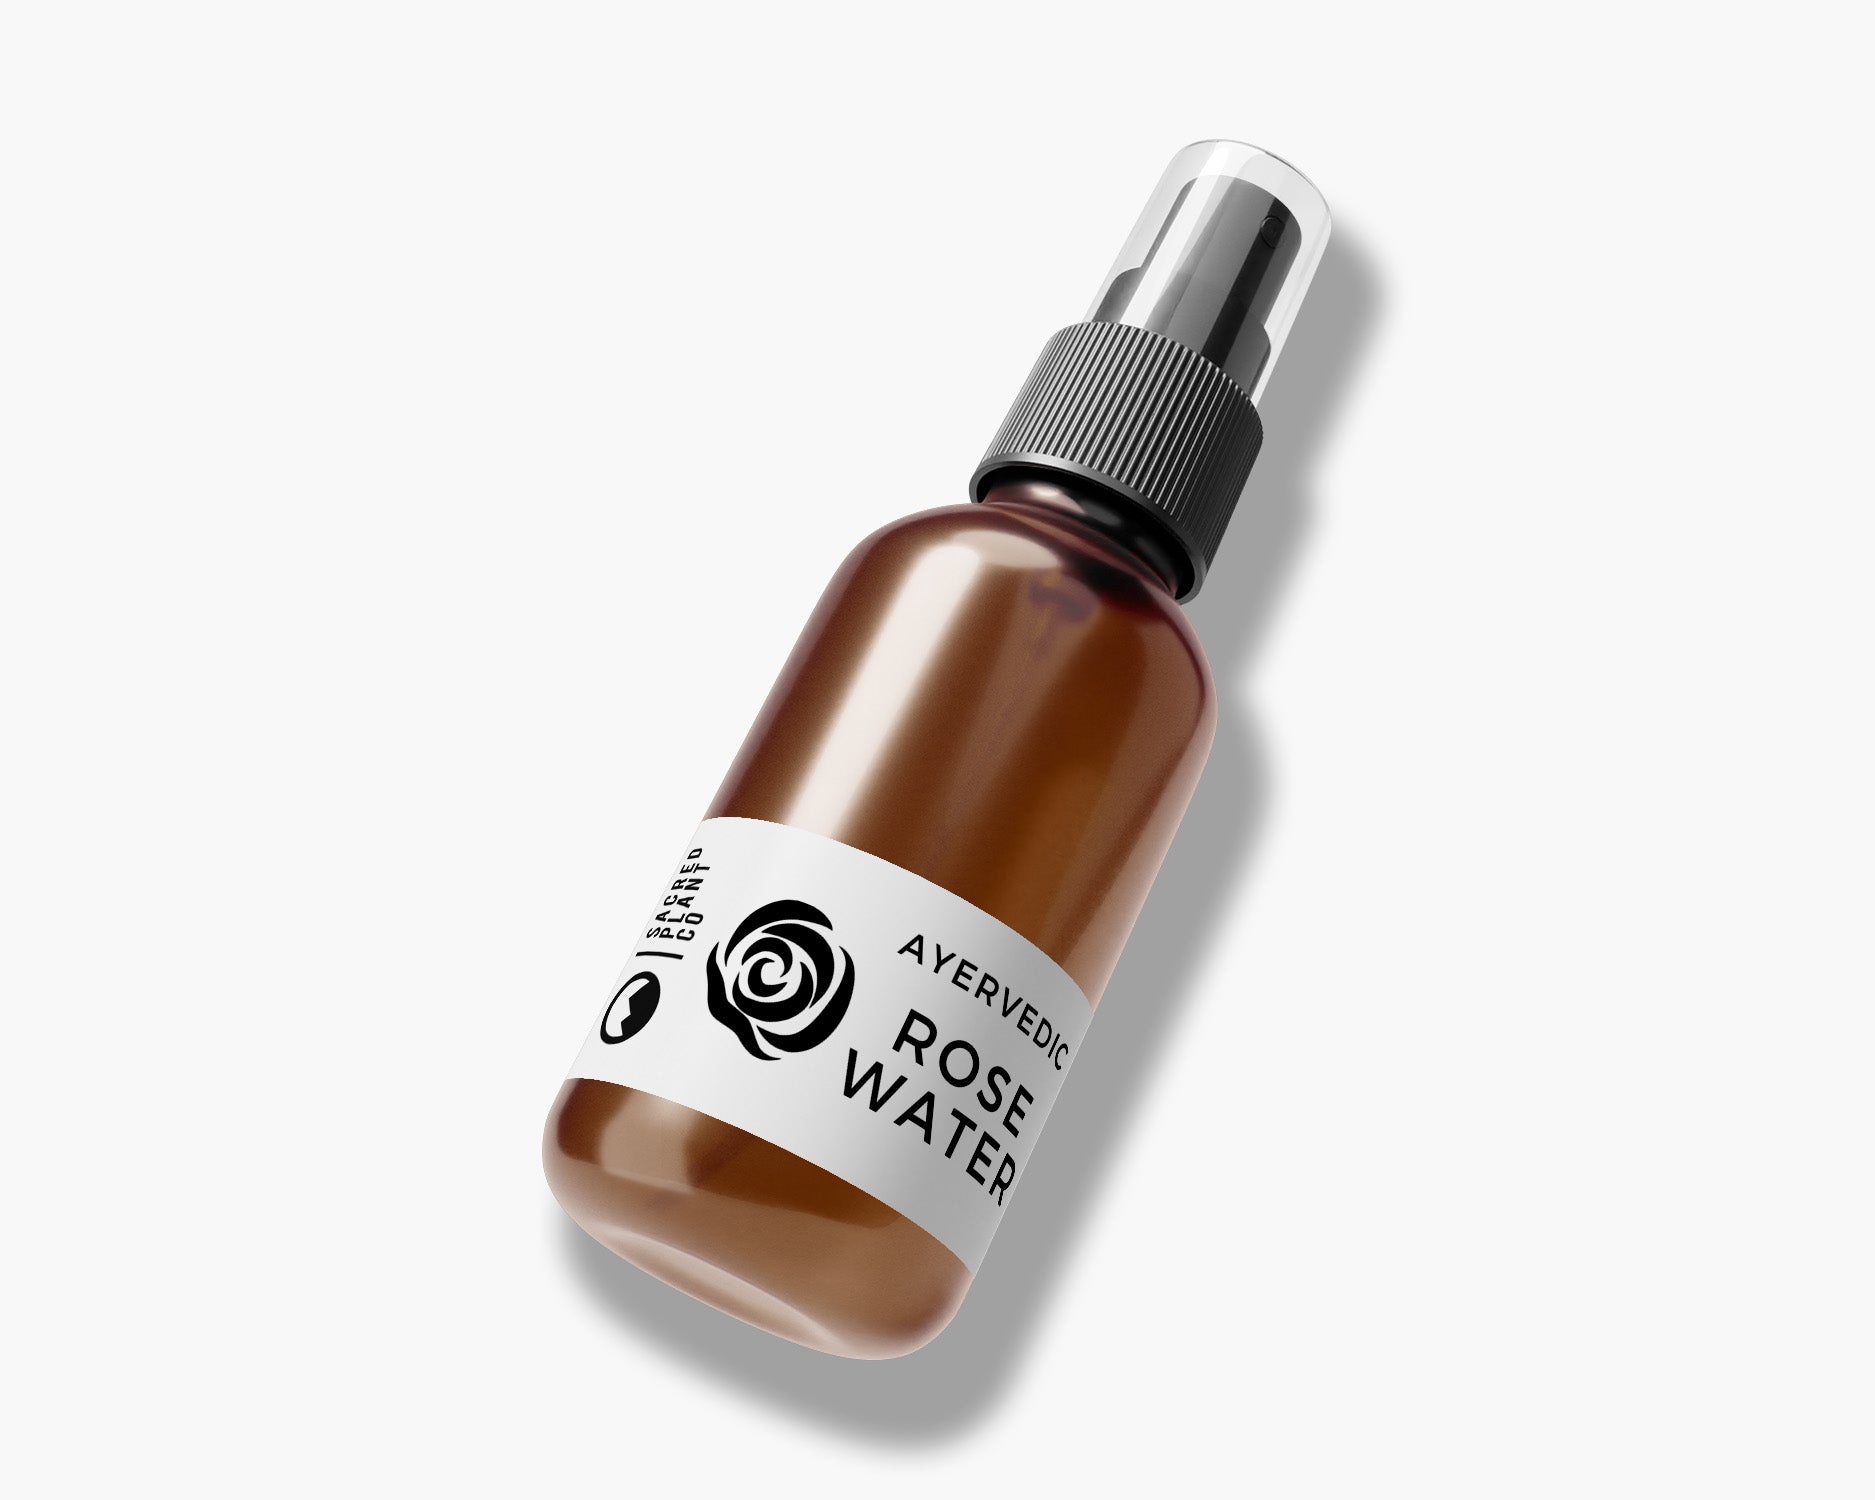 Amber bottle of Rose Water Spray from Sacred Plant Co.